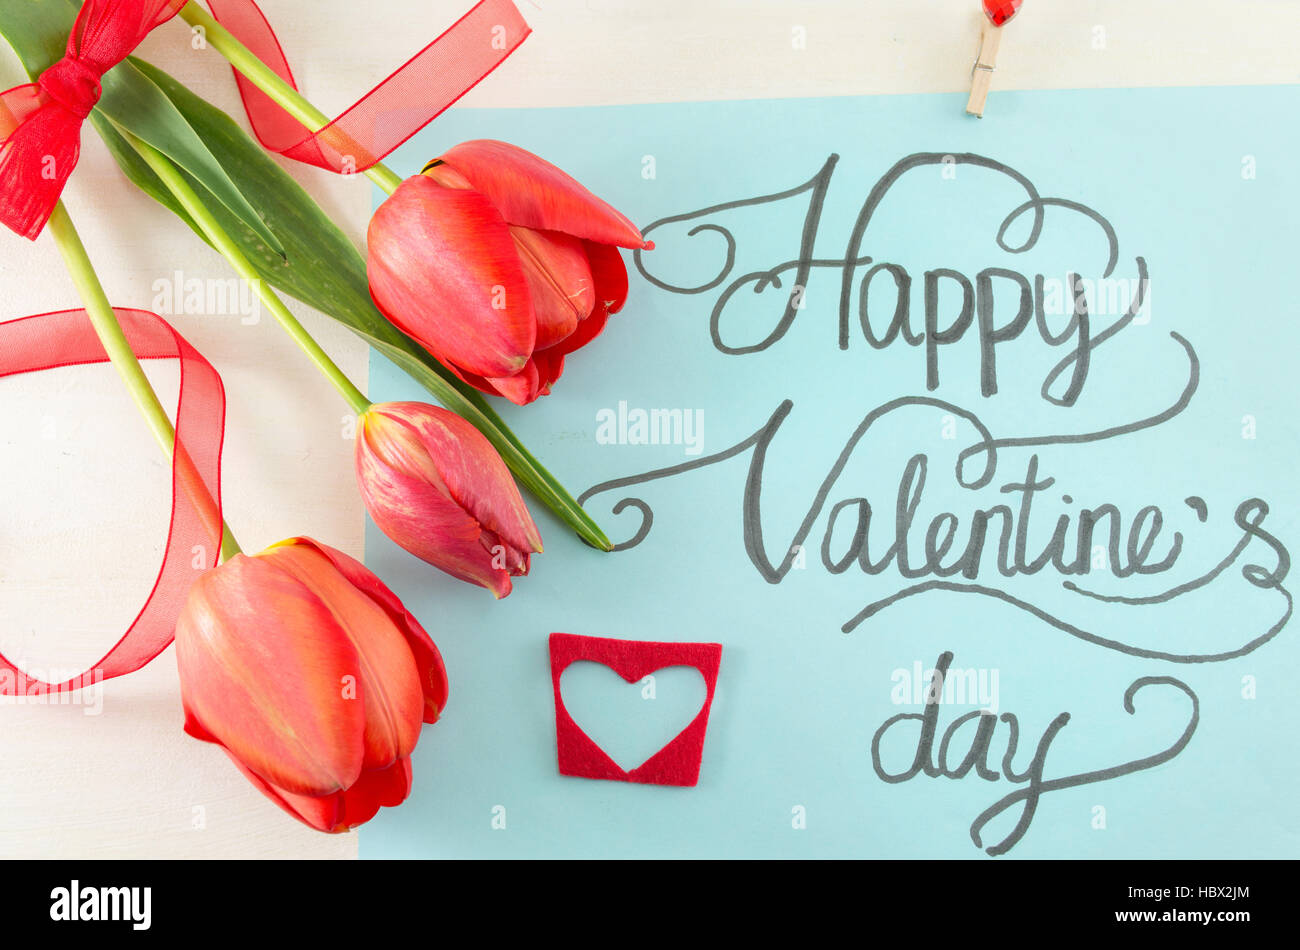 Happy Valentines day card calligraphy with tulips Stock Photo